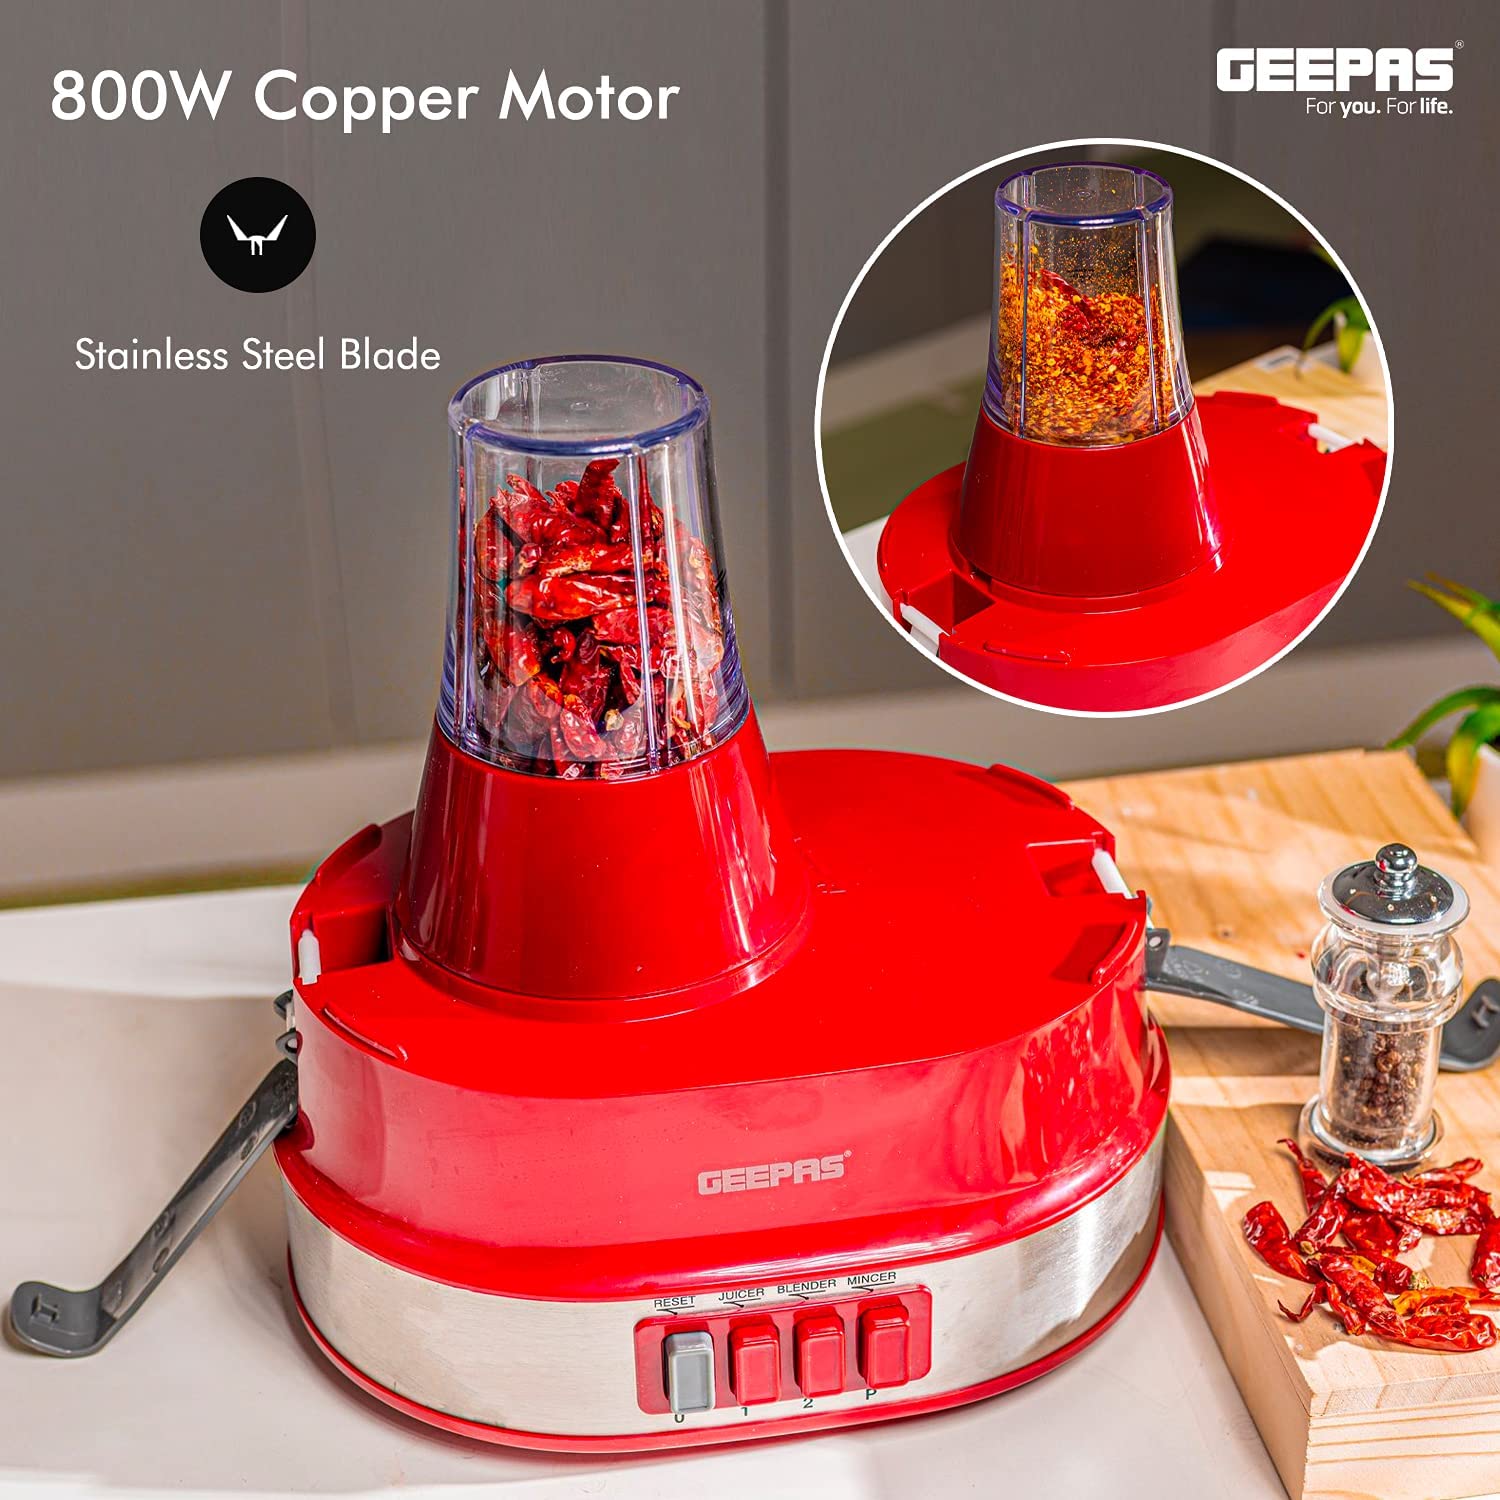 Geepas 4-In-1 Multi-Function Food Processor | Electric Blender Juicer, 2-Speed With Pulse Function & Safety Interlock | 800W |Juicer, Blender, Mixture & Coffee Mill Included- Assorted